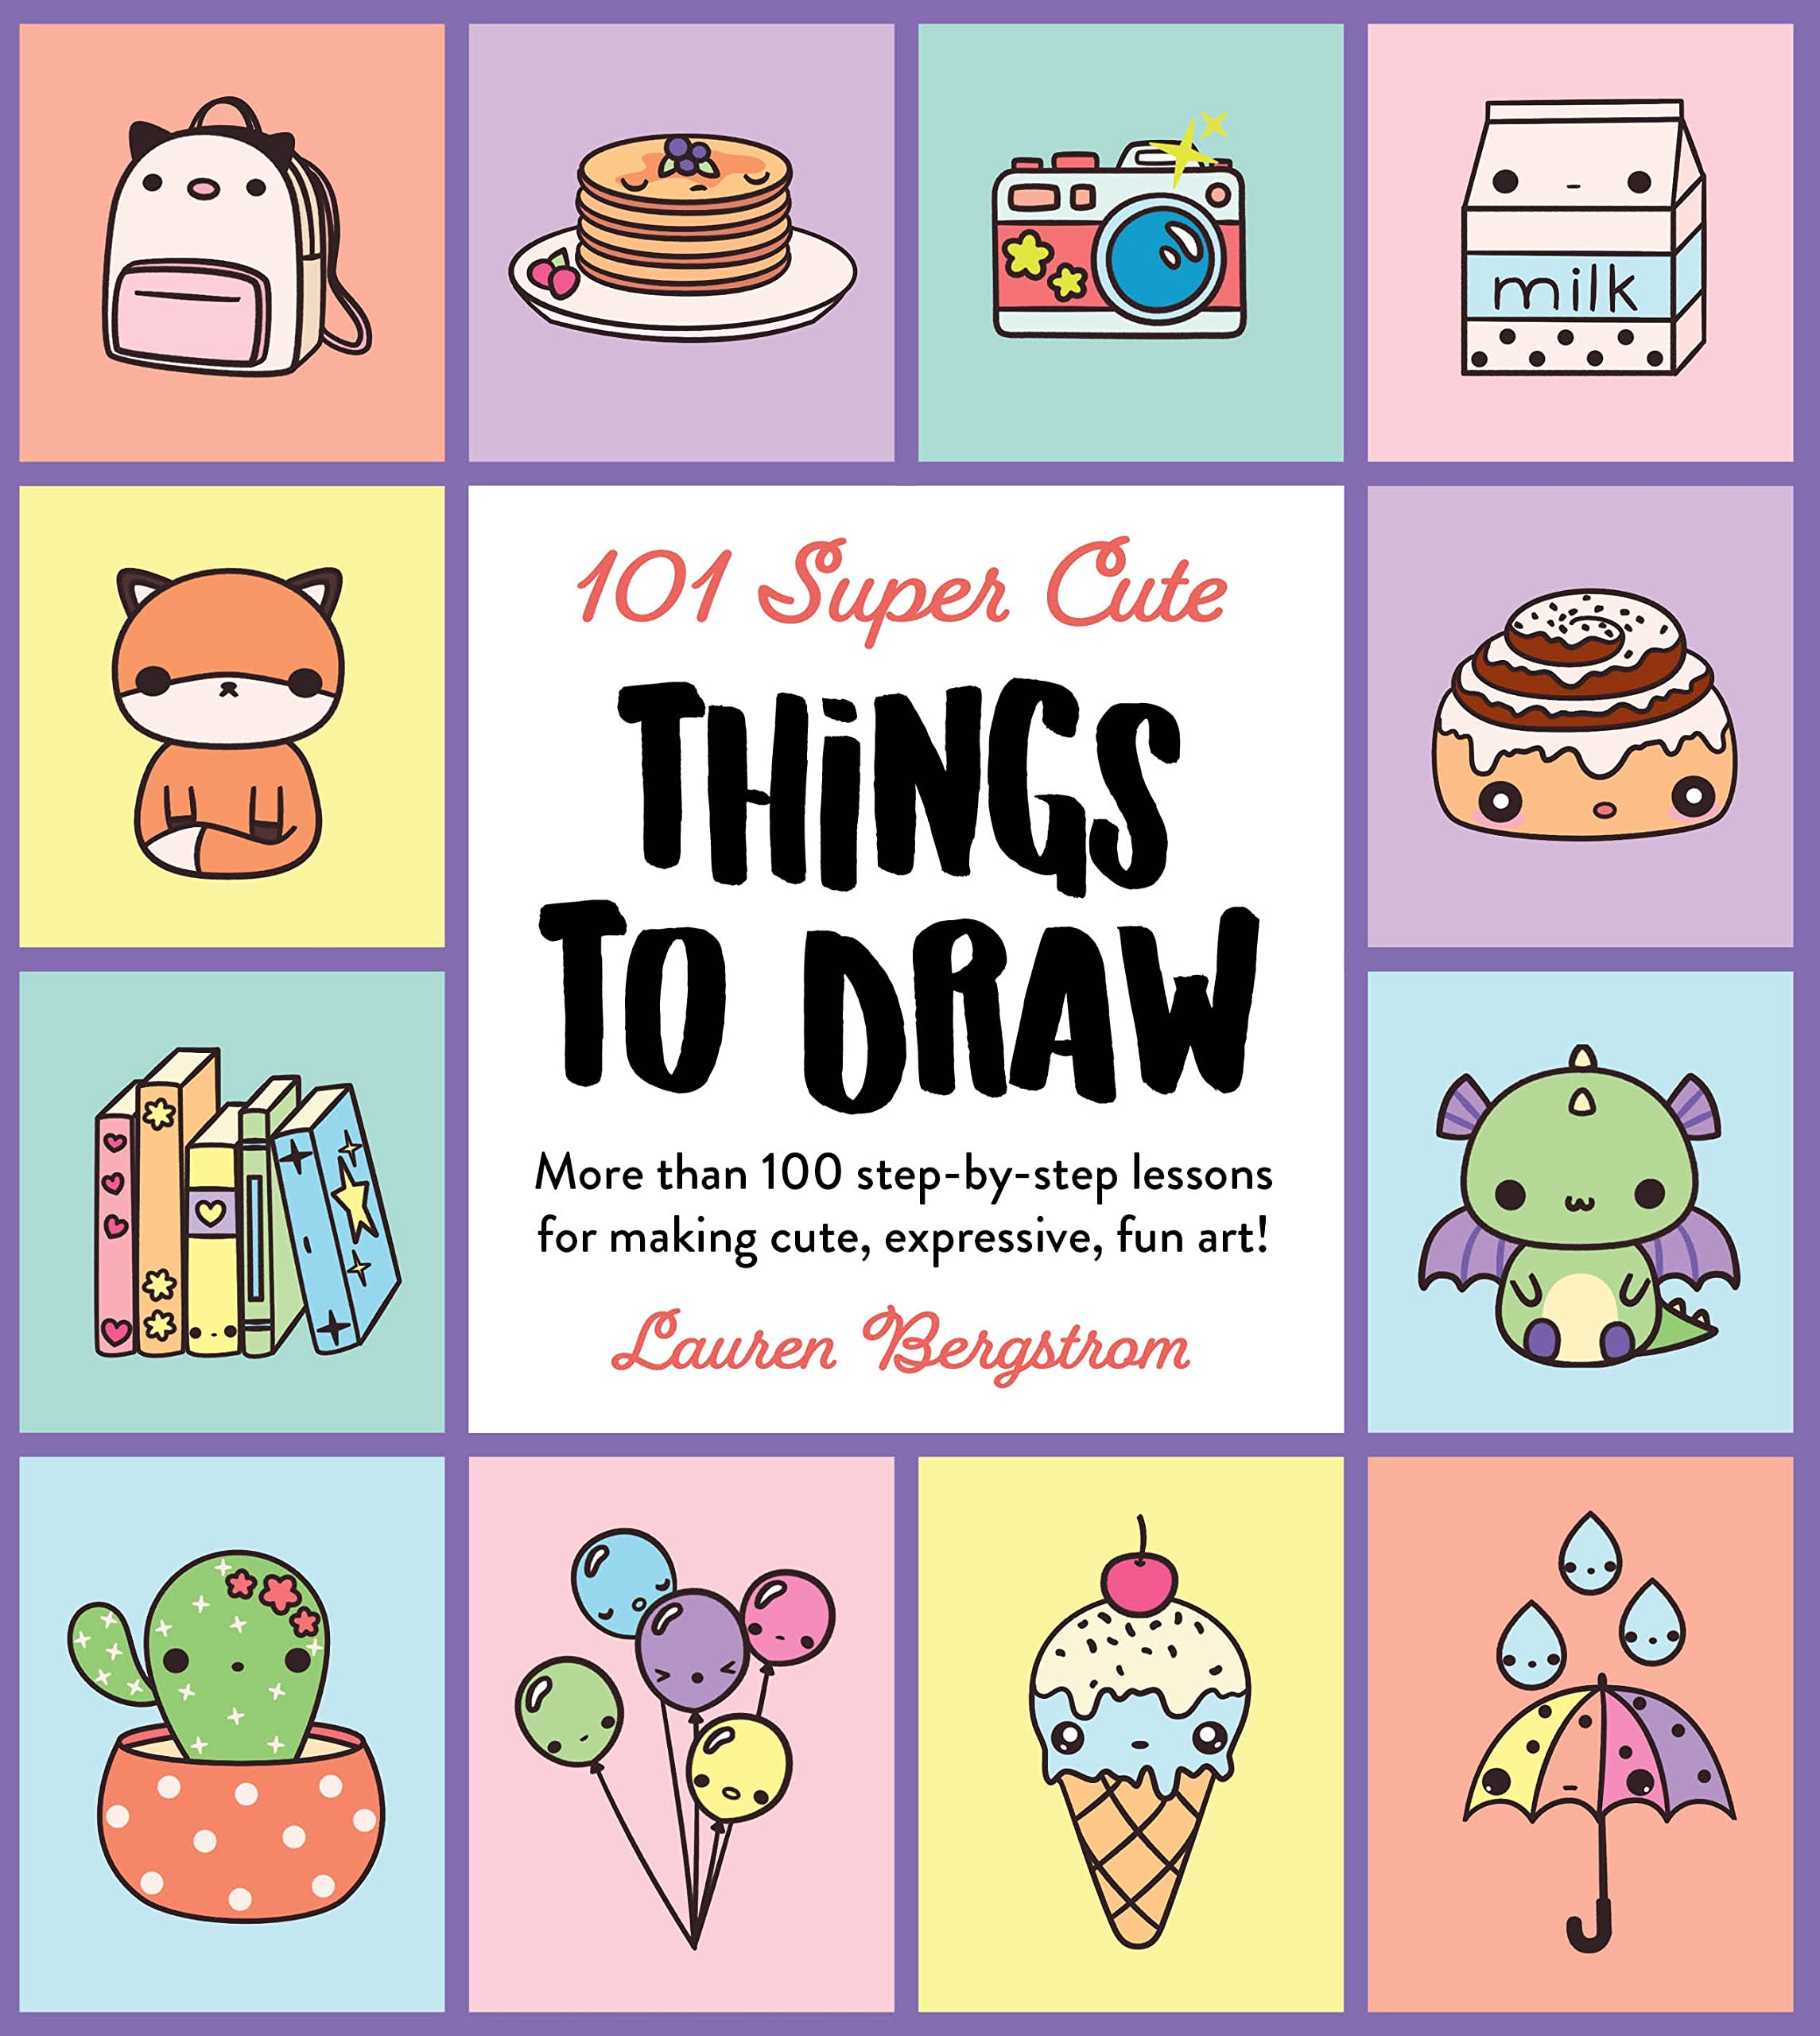 101 Super Cute Things to Draw More than 100 stepbystep lessons for